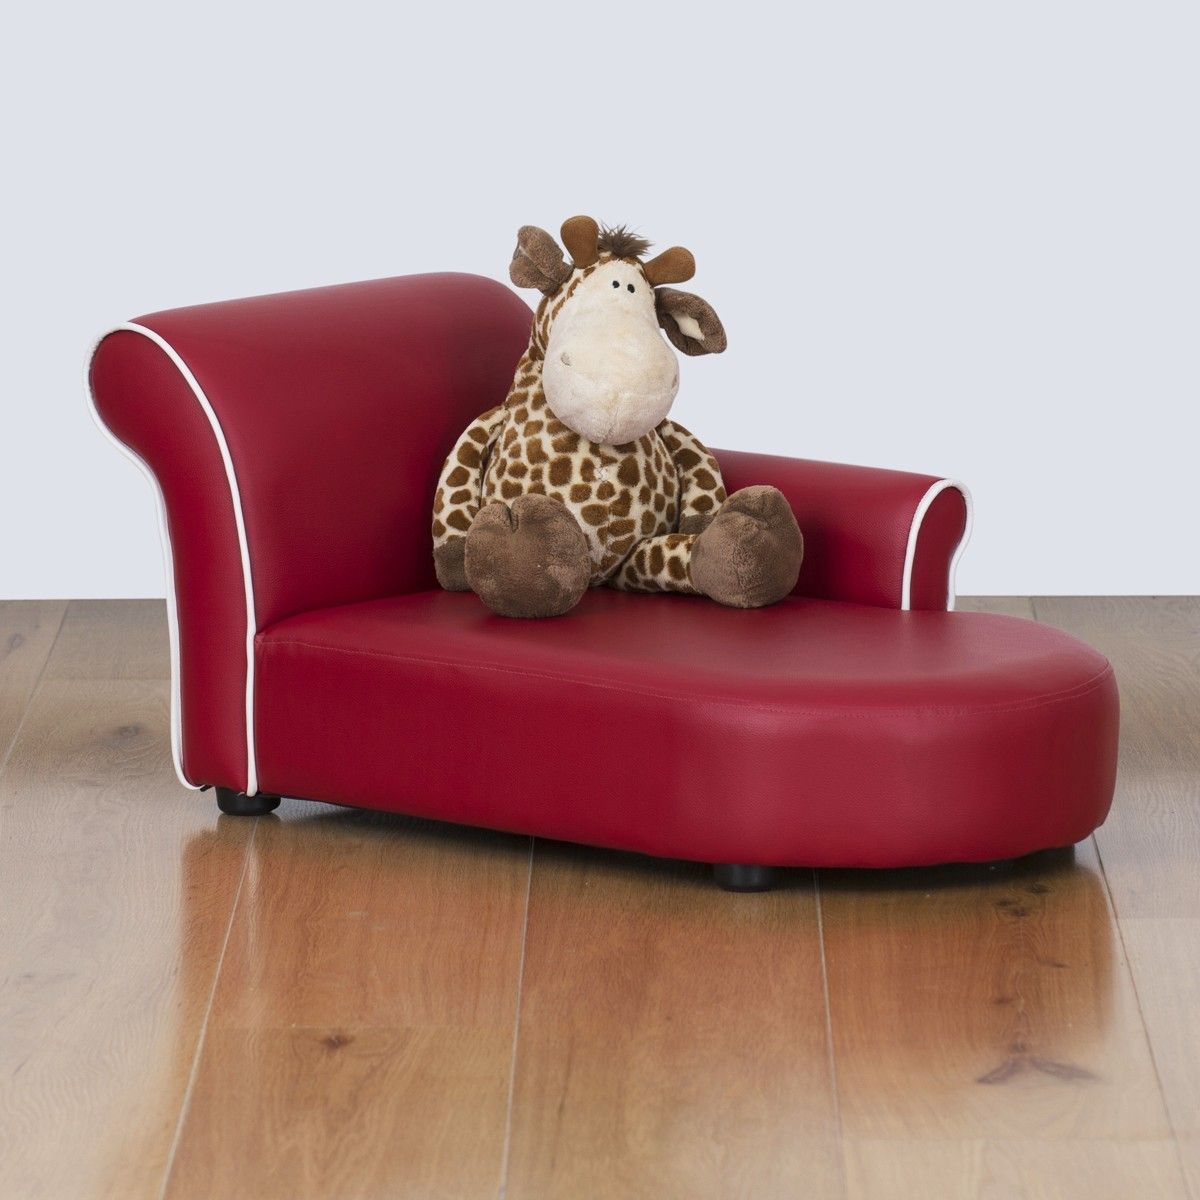 Childrens chaise lounge